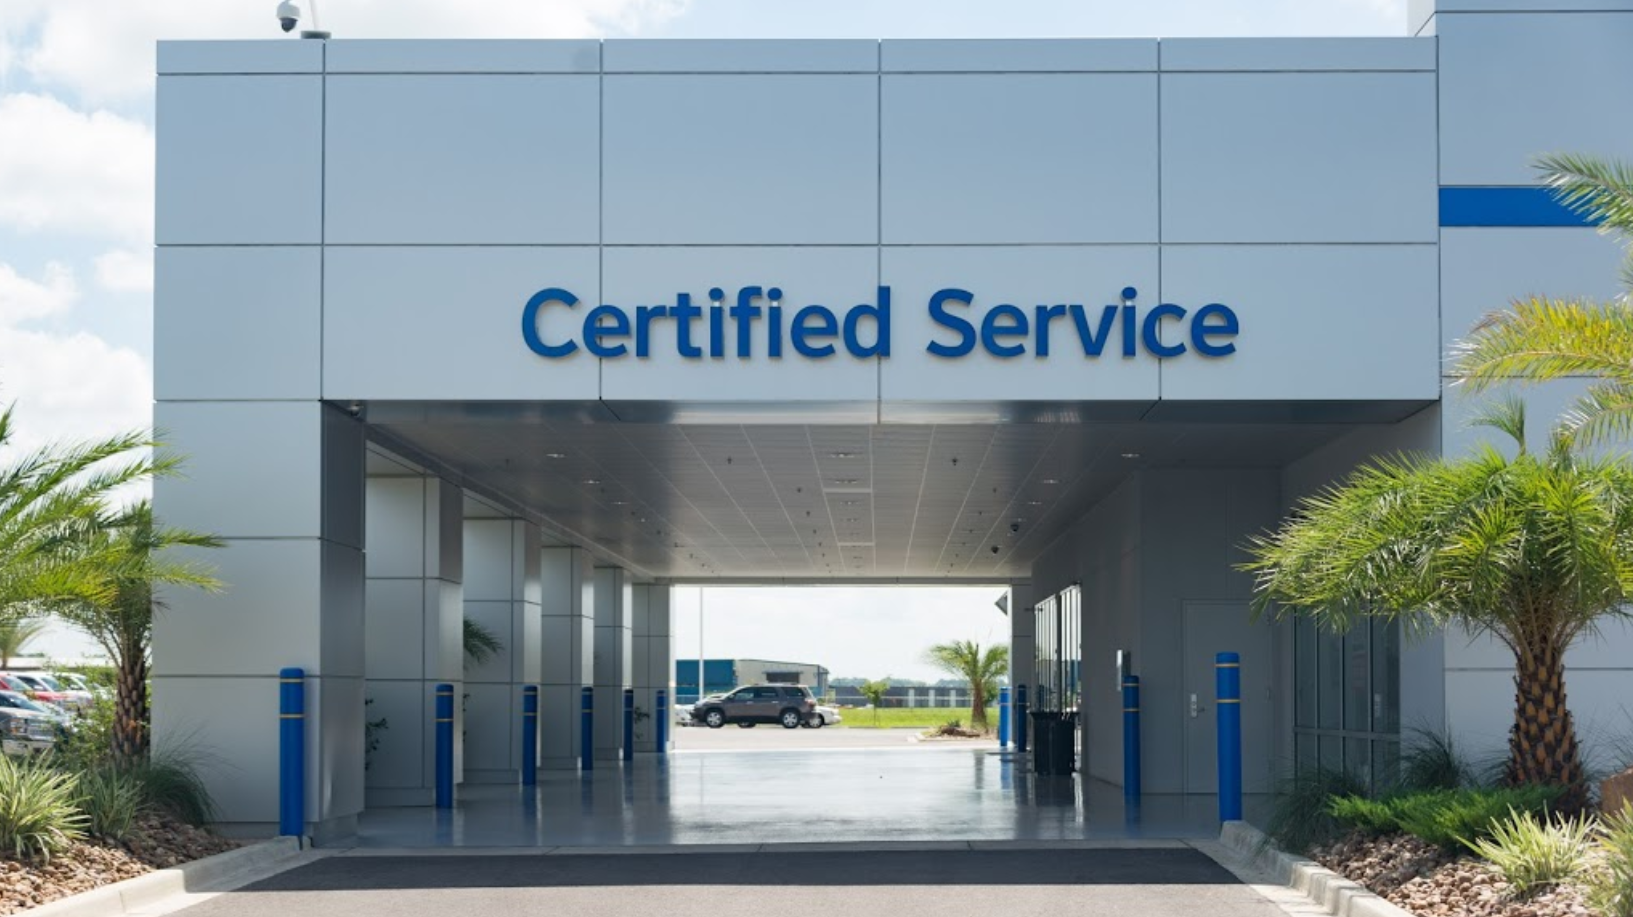 Certified Chevrolet Service and Auto Repair in Lafayette, LA at Courtesy Chevrolet Broussard